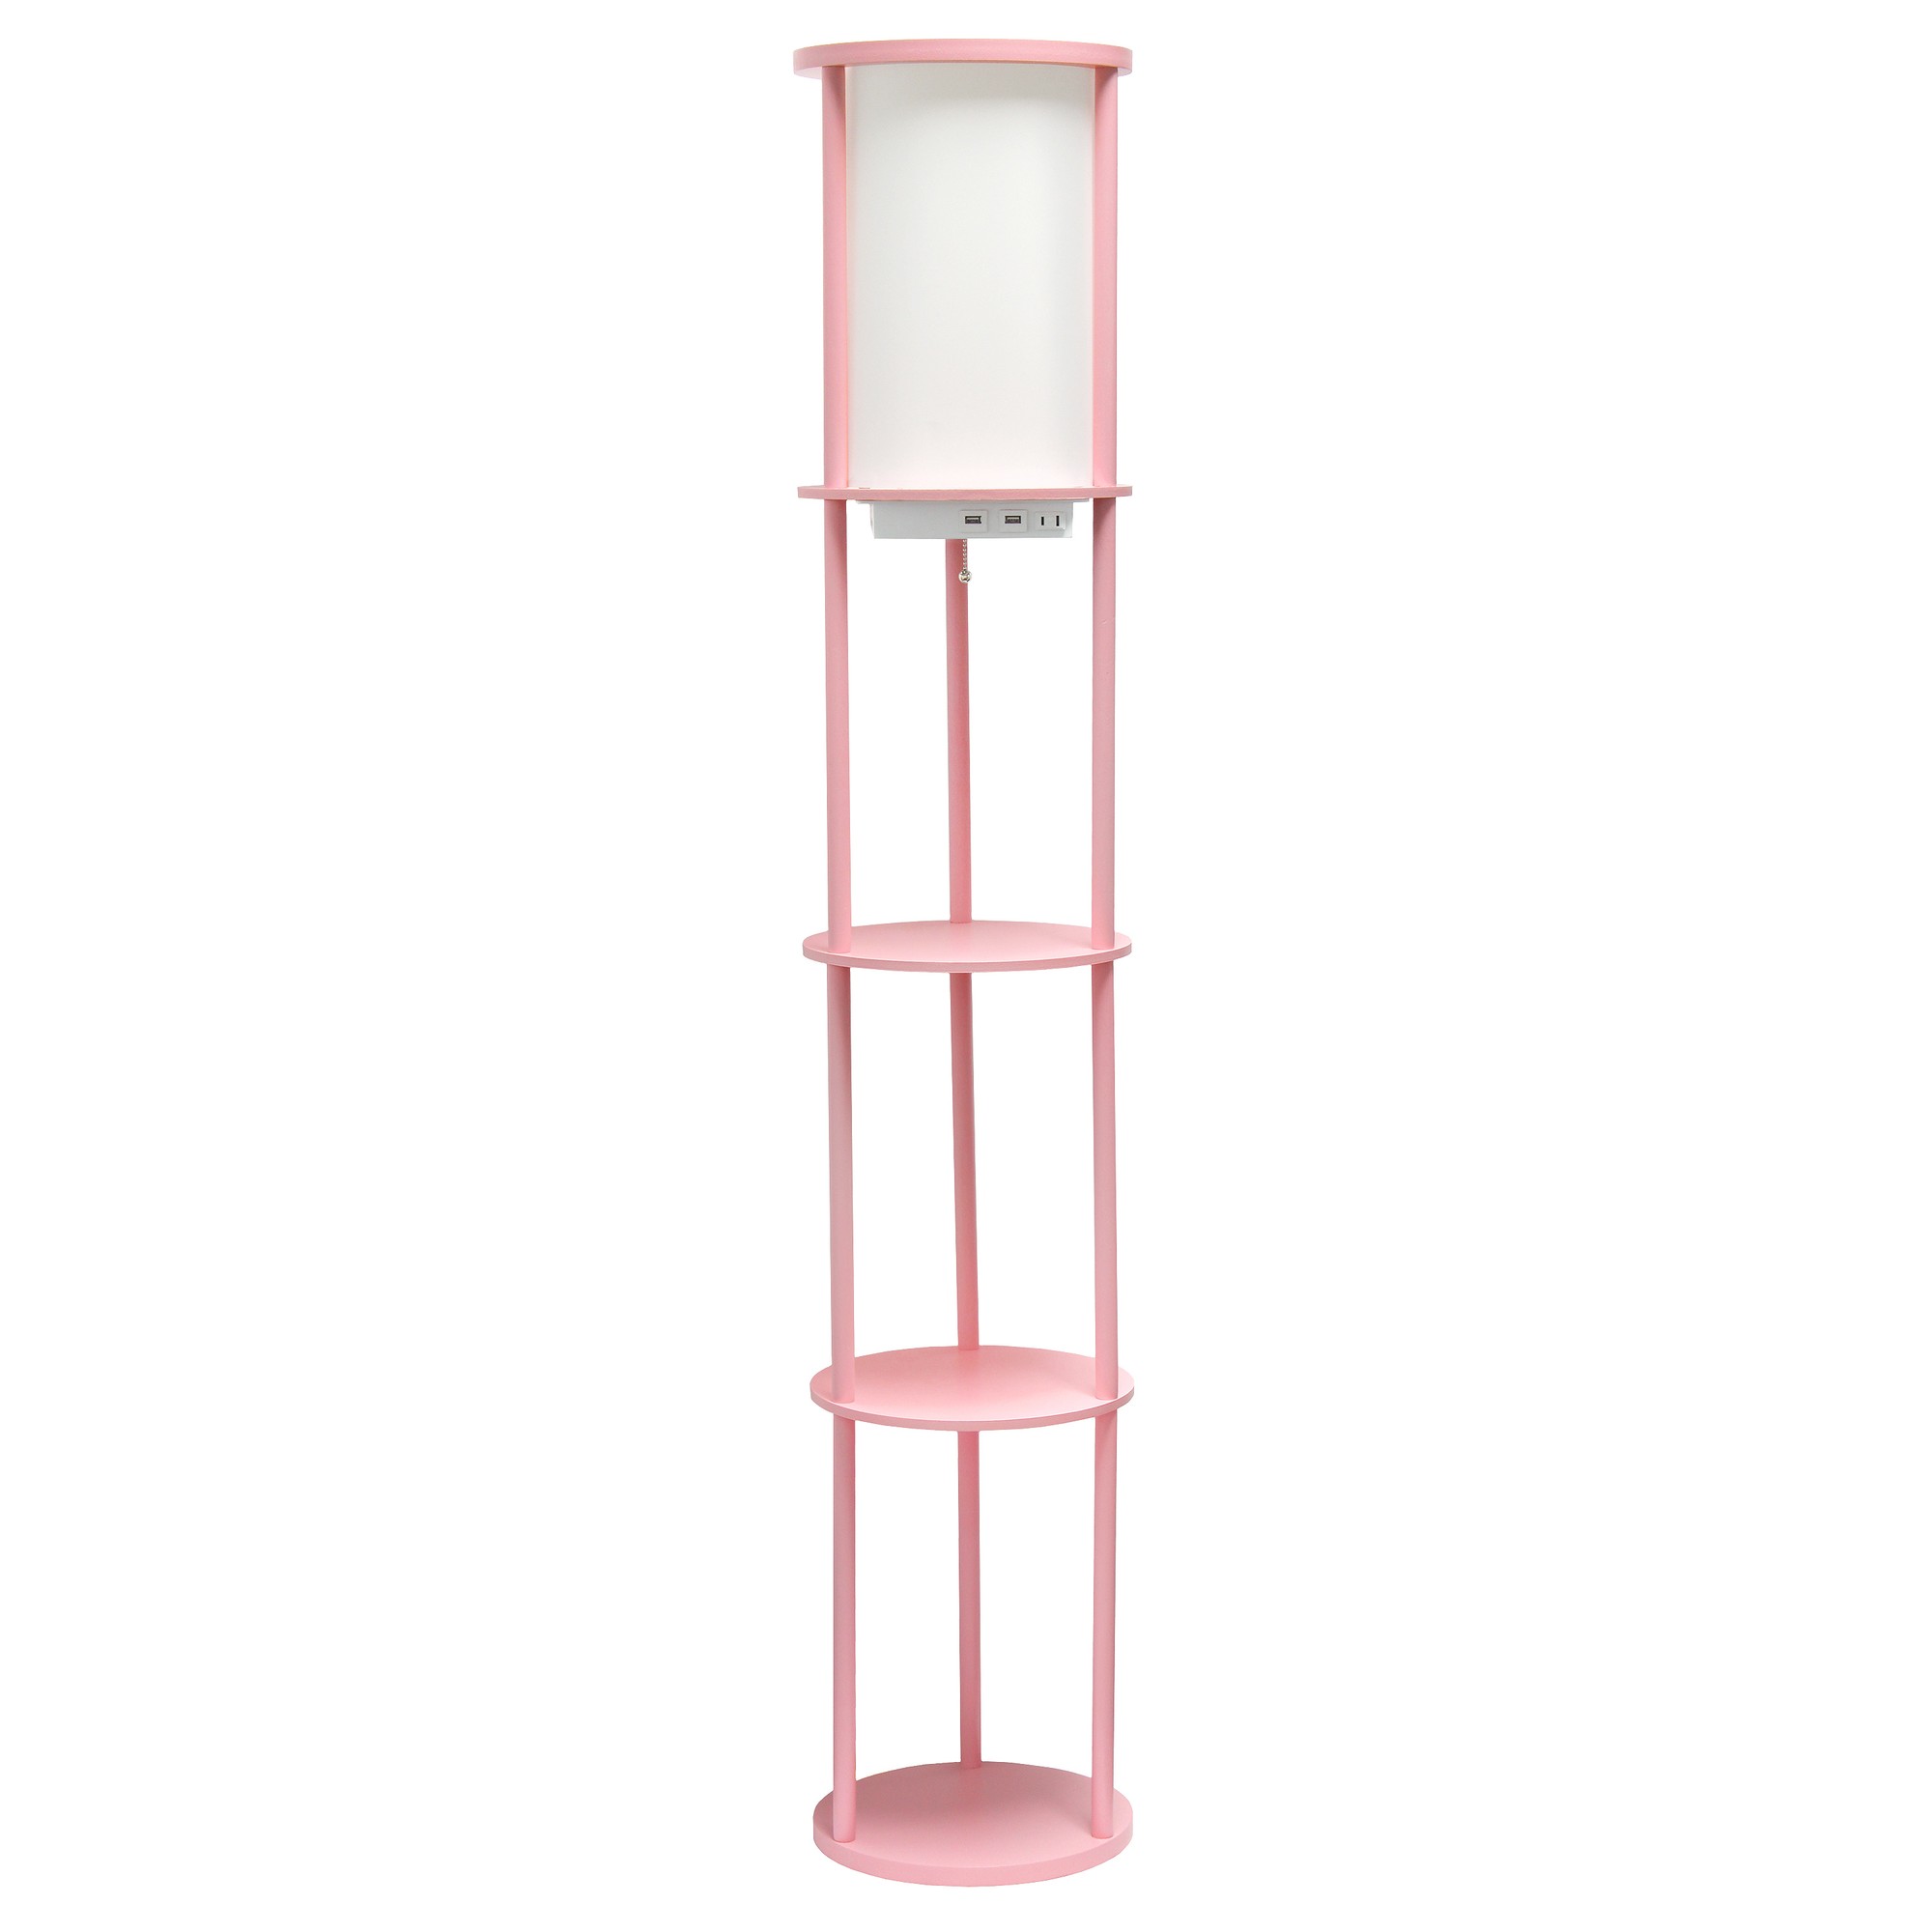 Simple Designs 62.5" Round Storage Floor Lamp with 2 USB Charging Ports, 1 Charging Outlet and Linen Shade, Light Pink